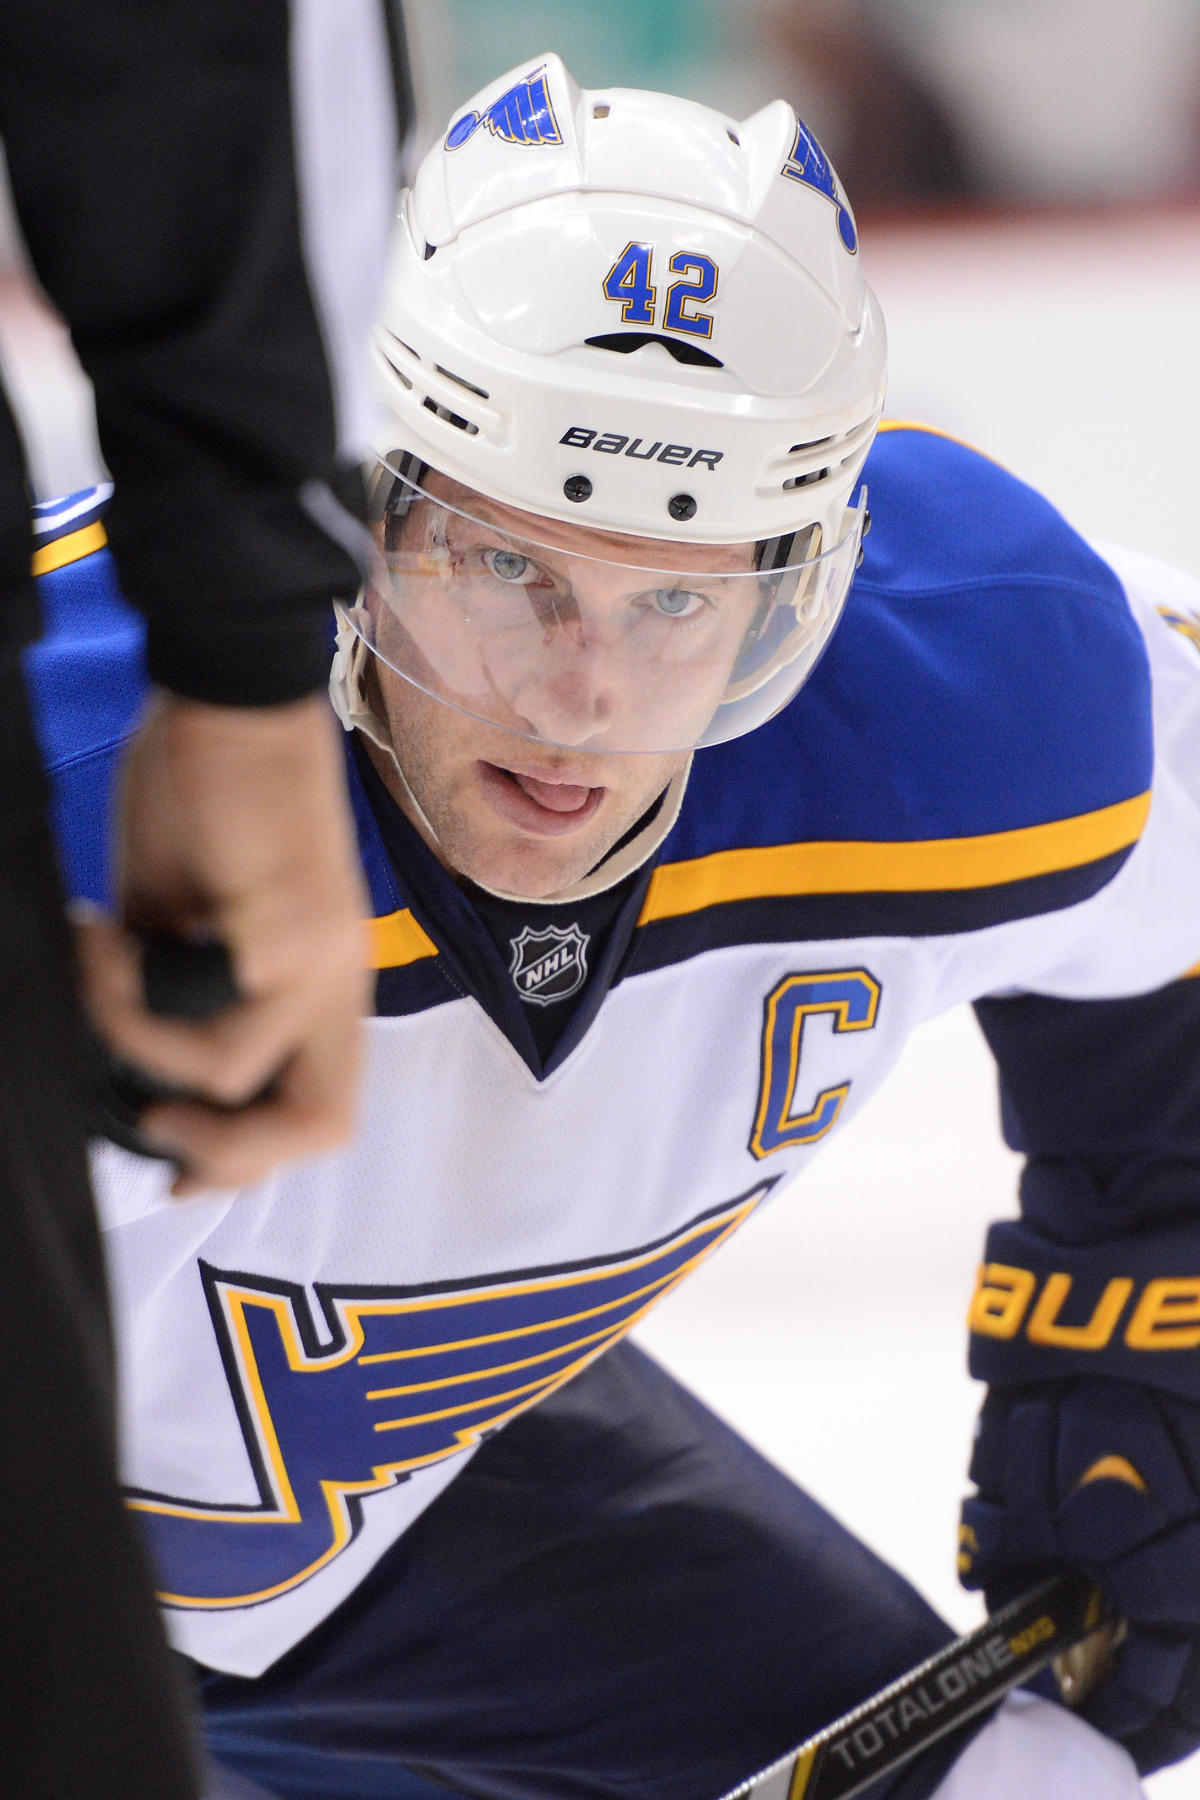 David Backes, T.J. Oshie out for Blues with concussions 